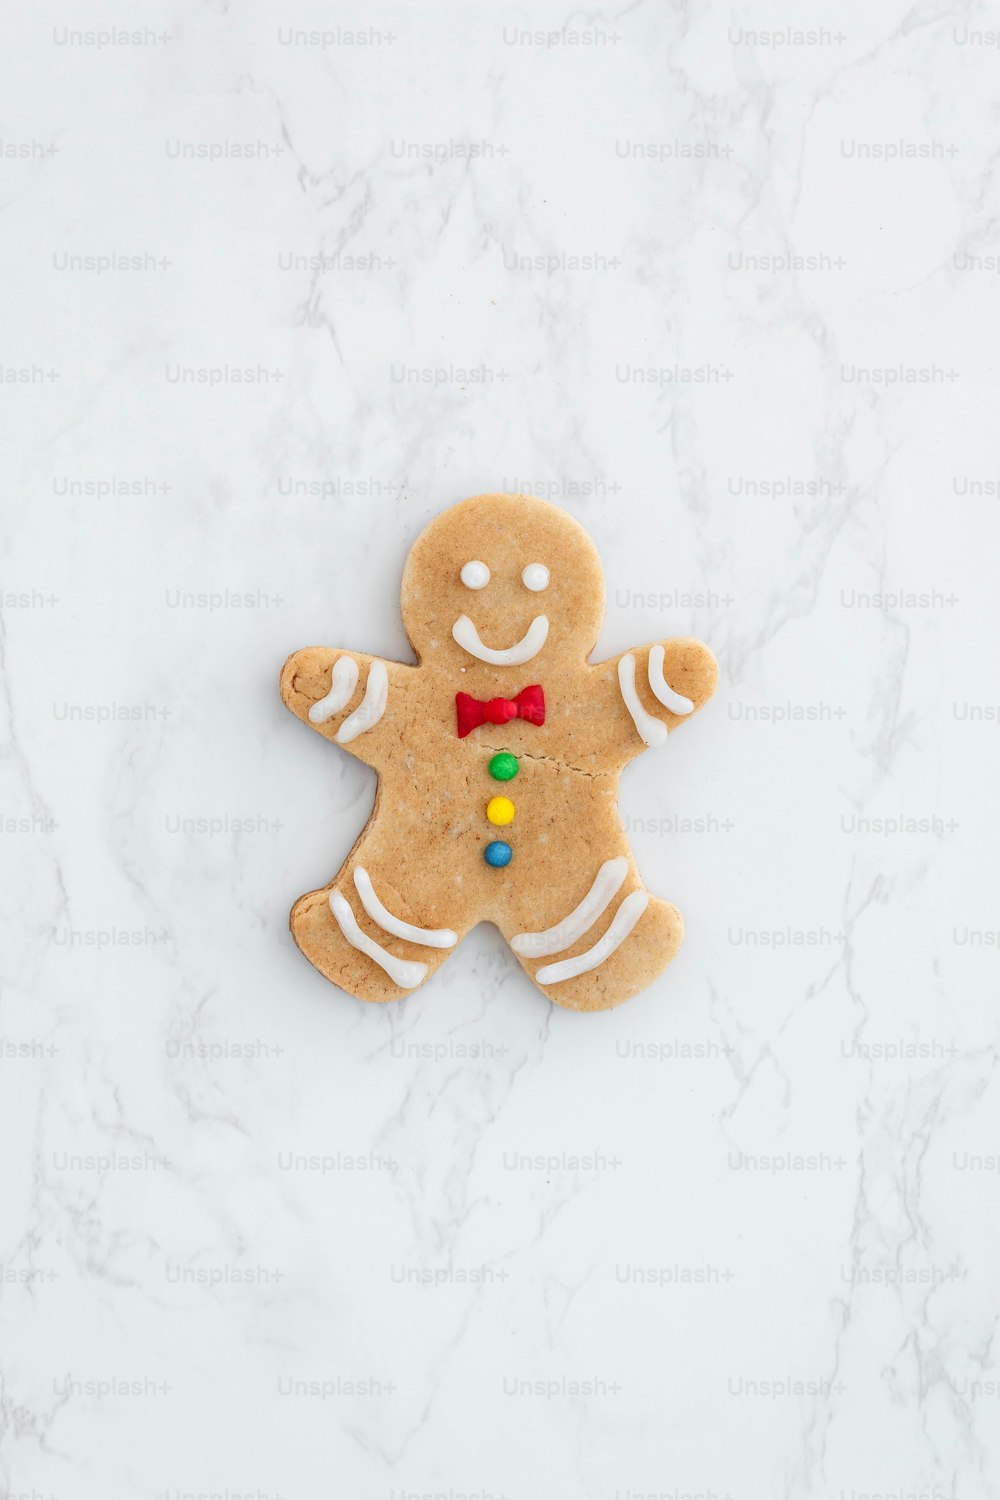 a cookie shaped like a ginger with a bow tie